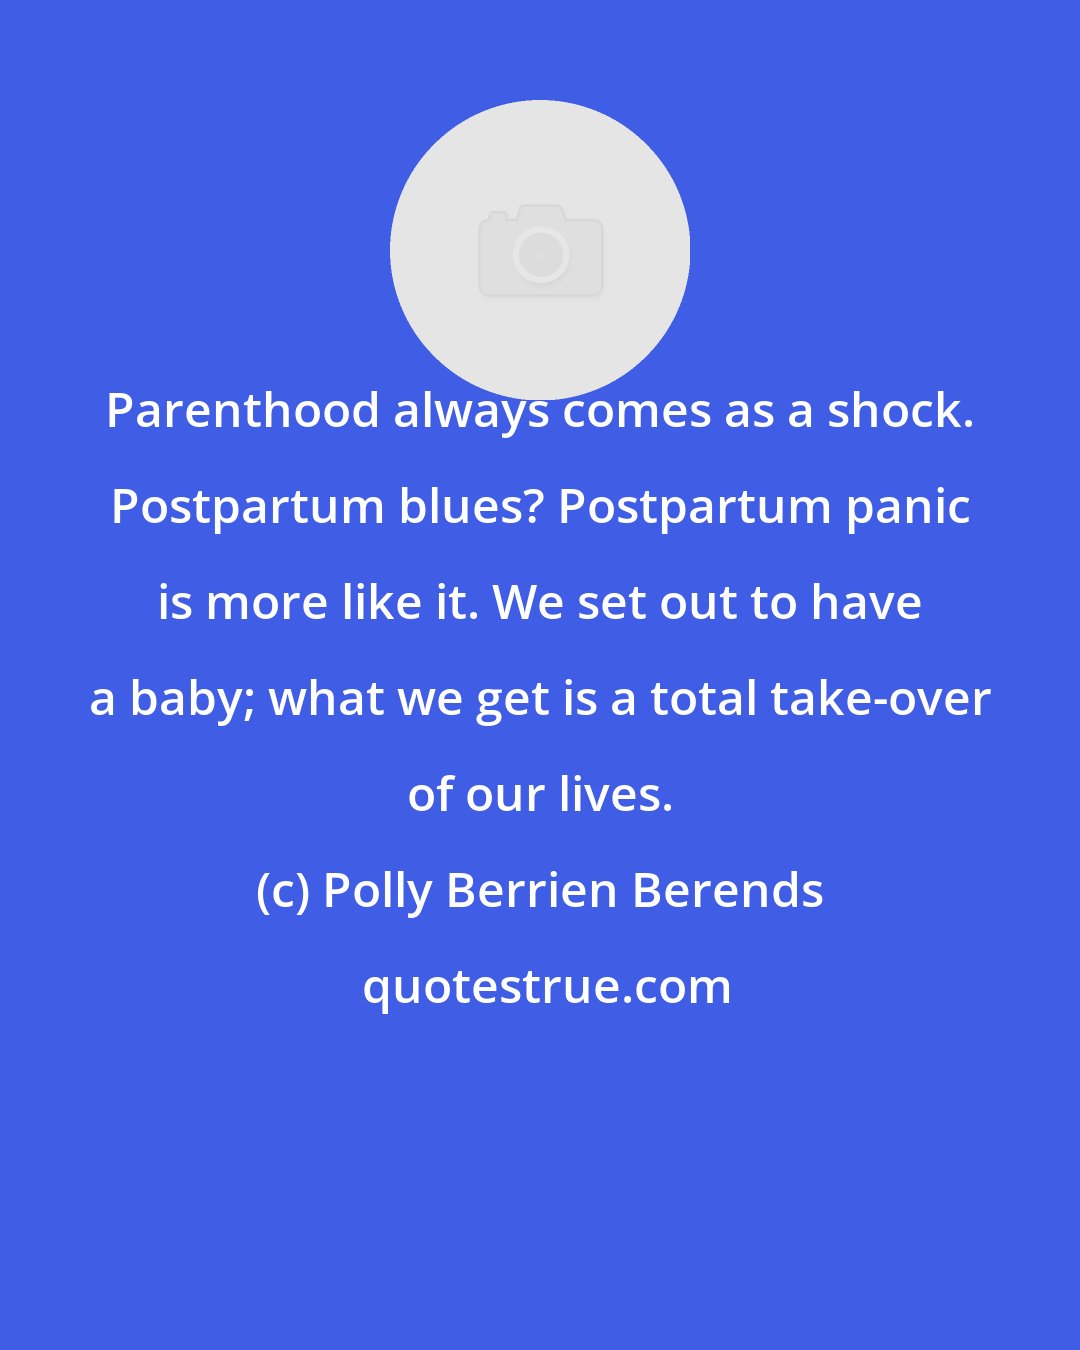 Polly Berrien Berends: Parenthood always comes as a shock. Postpartum blues? Postpartum panic is more like it. We set out to have a baby; what we get is a total take-over of our lives.